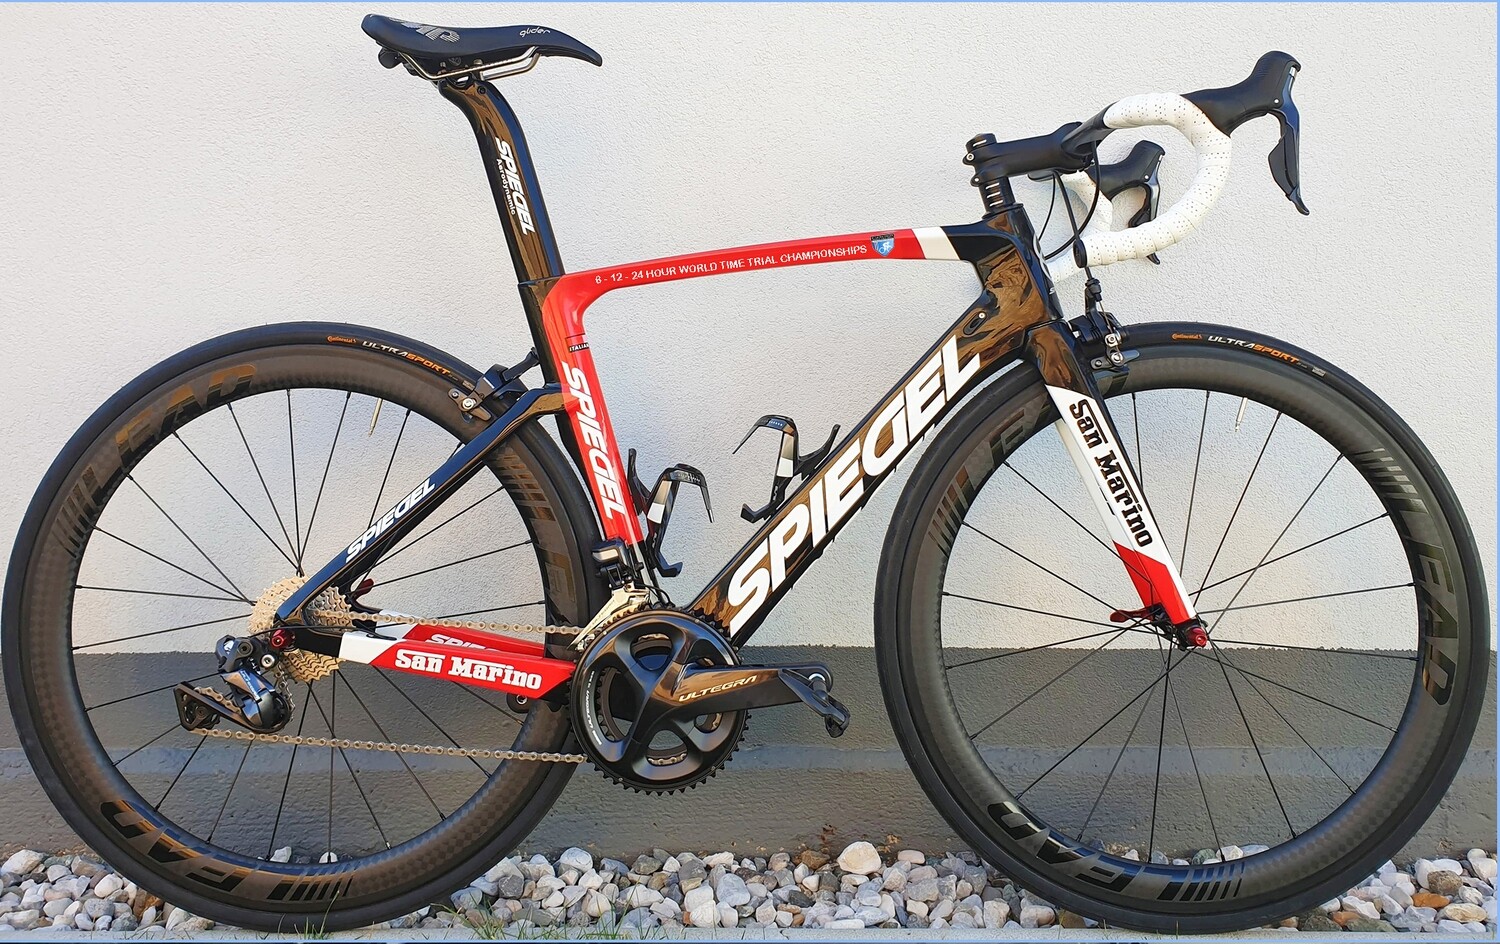 WTTC - Spiegel San Marino With Personalized Graphics - Disc Brake Compatible (Non-USA Shipping)